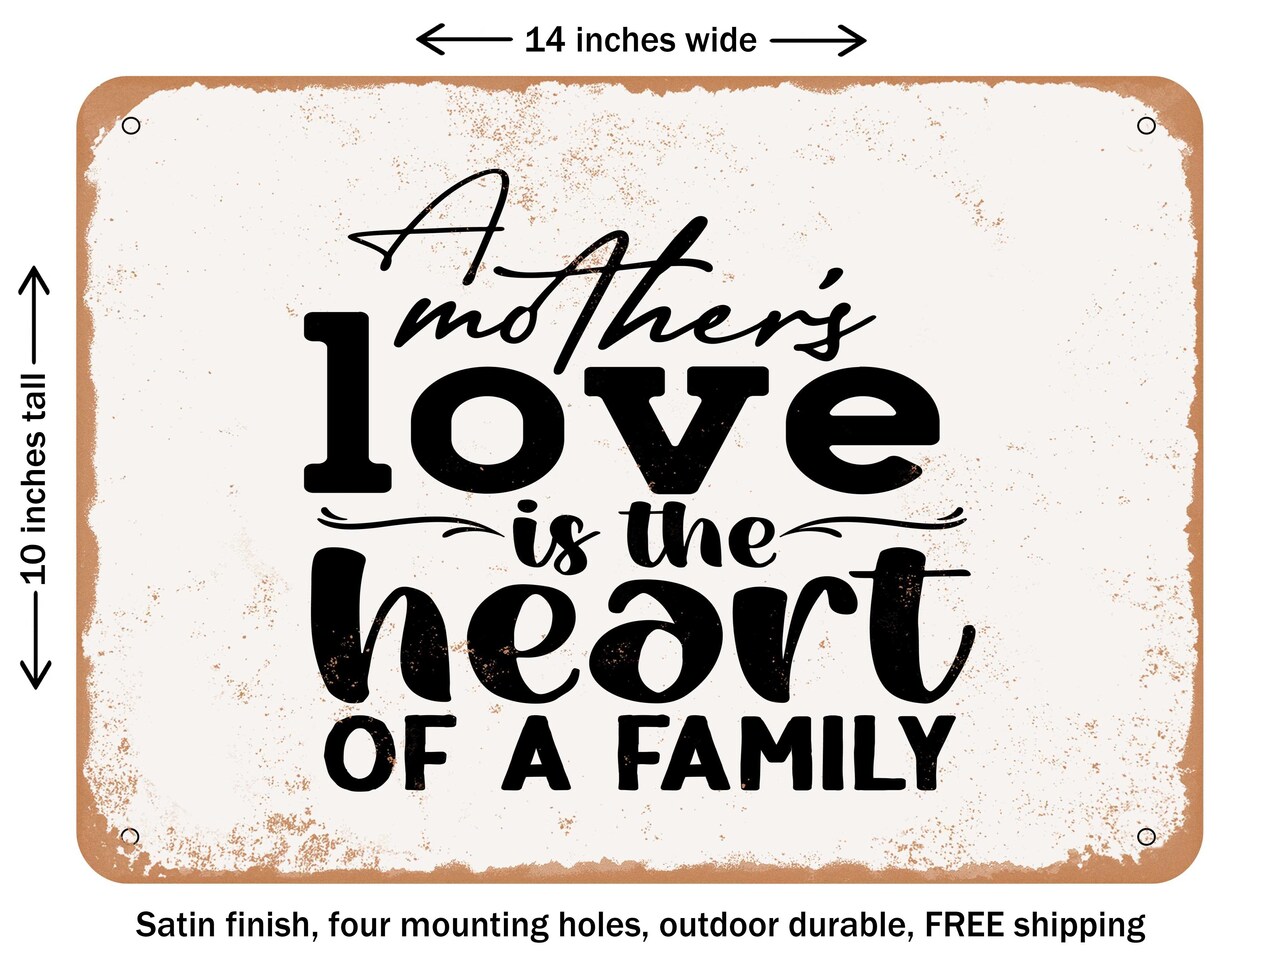 DECORATIVE METAL SIGN - a Mothers Love is the Heart of a Family - 2 - Vintage Rusty Look